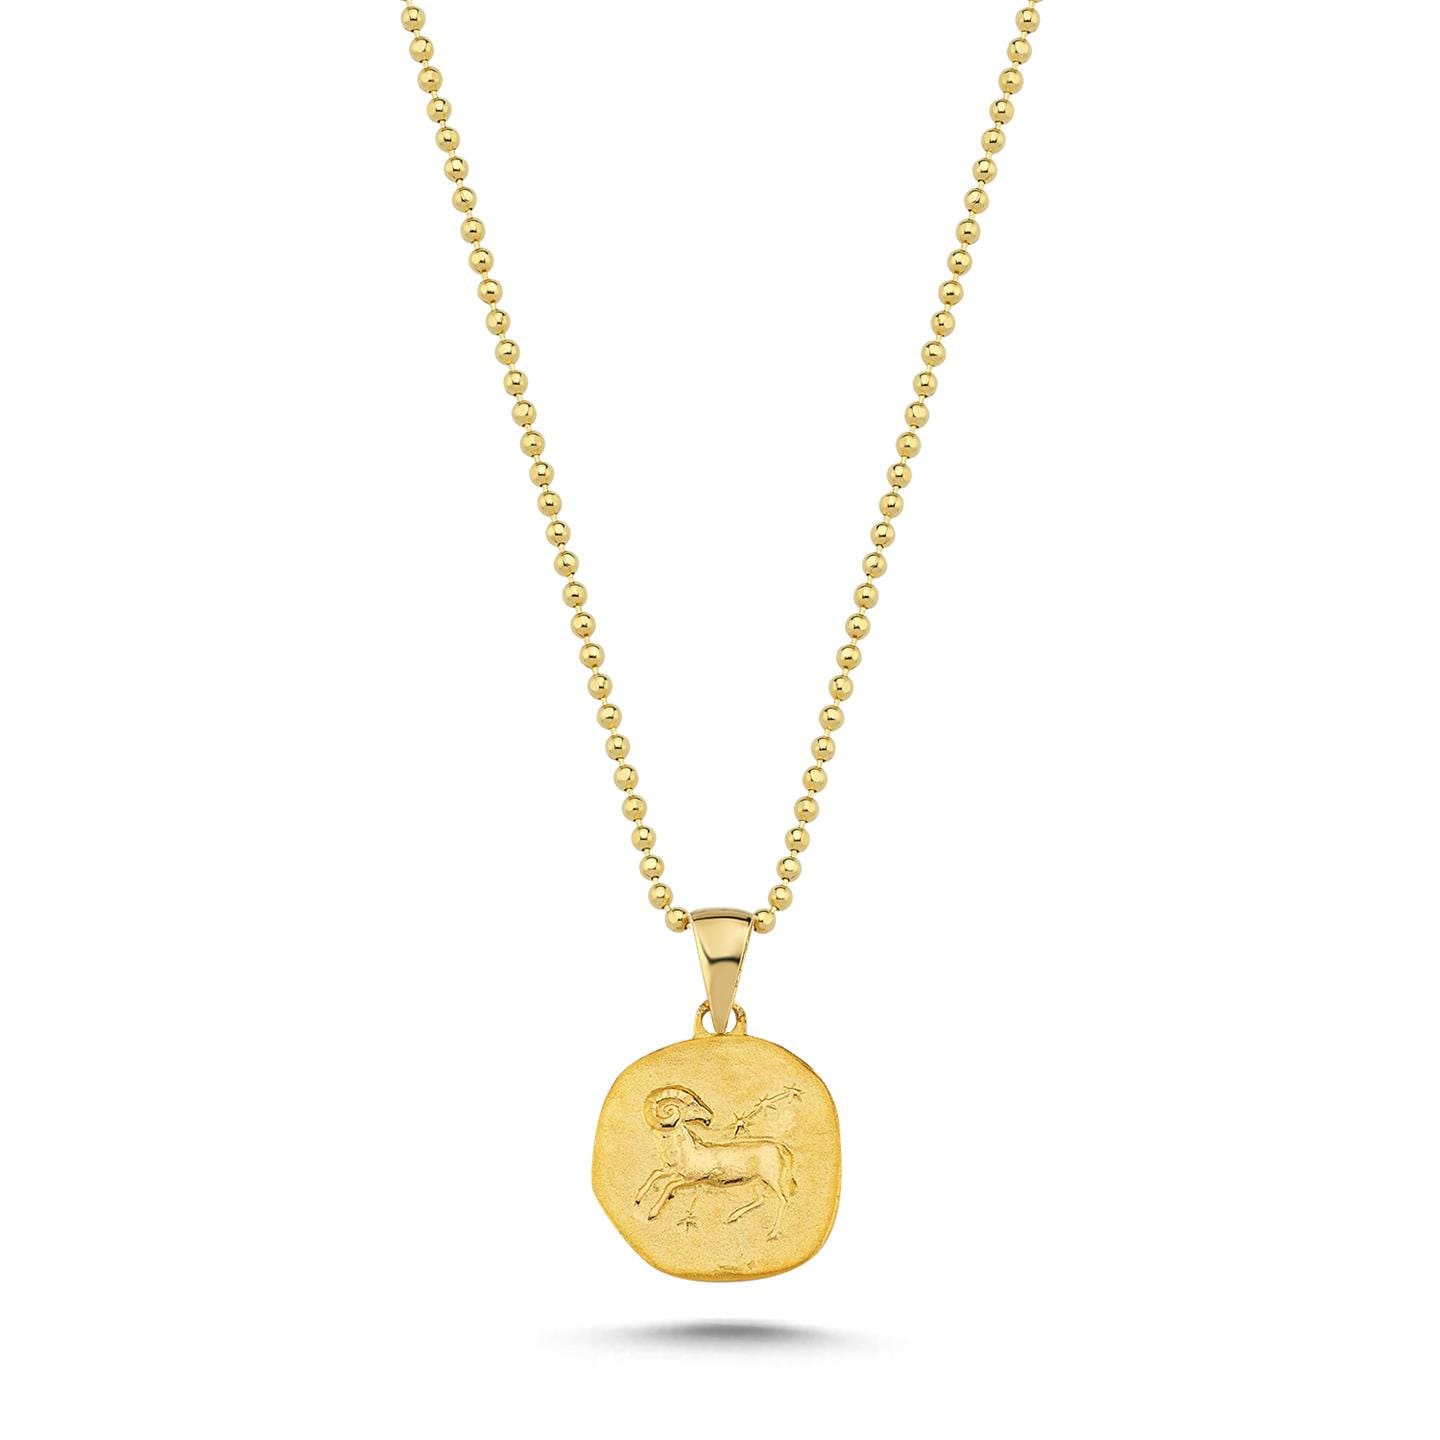 14K Gold Zodiac Aries Necklace - Elegant Aries Necklace - Perfect Gift for Astrology Lovers